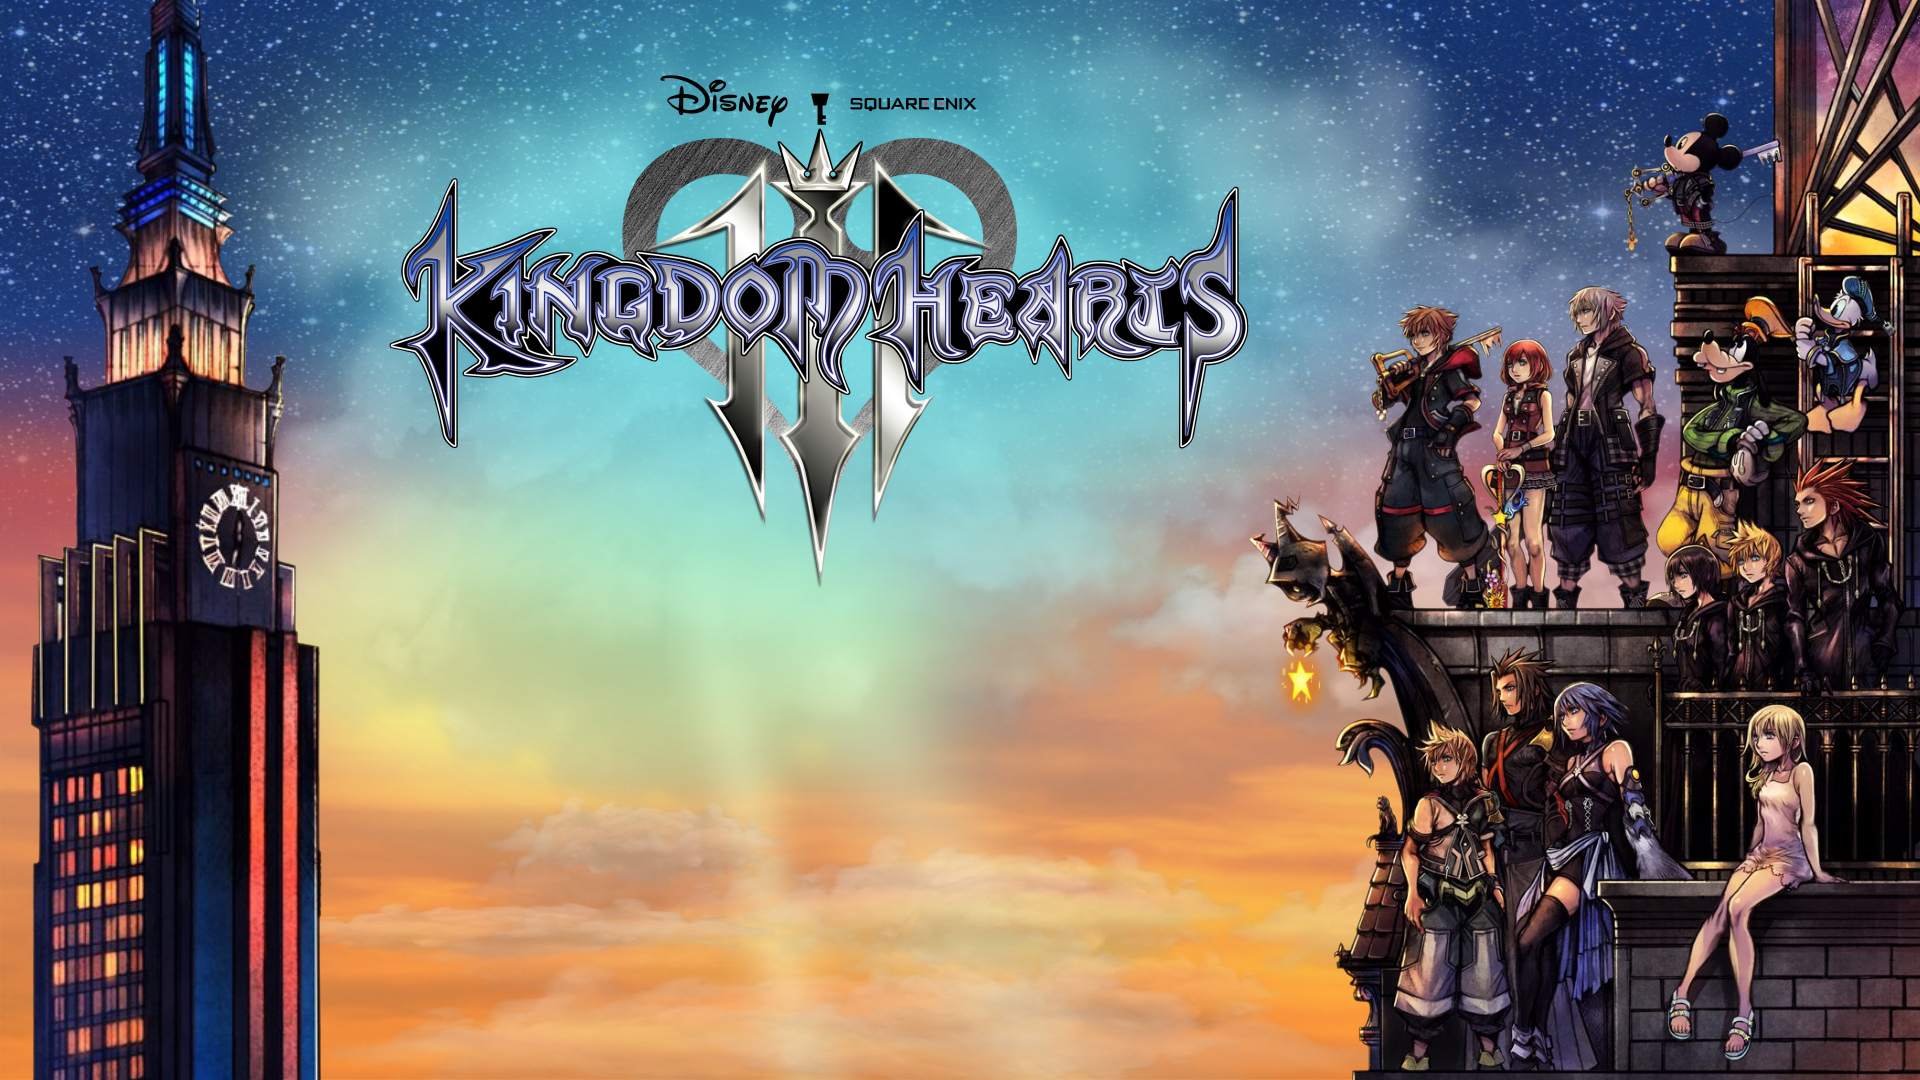 KH3] [Media] Just my take on making the recently released artwork into a 1080p wallpaper. Well, I tried :P: KingdomHearts